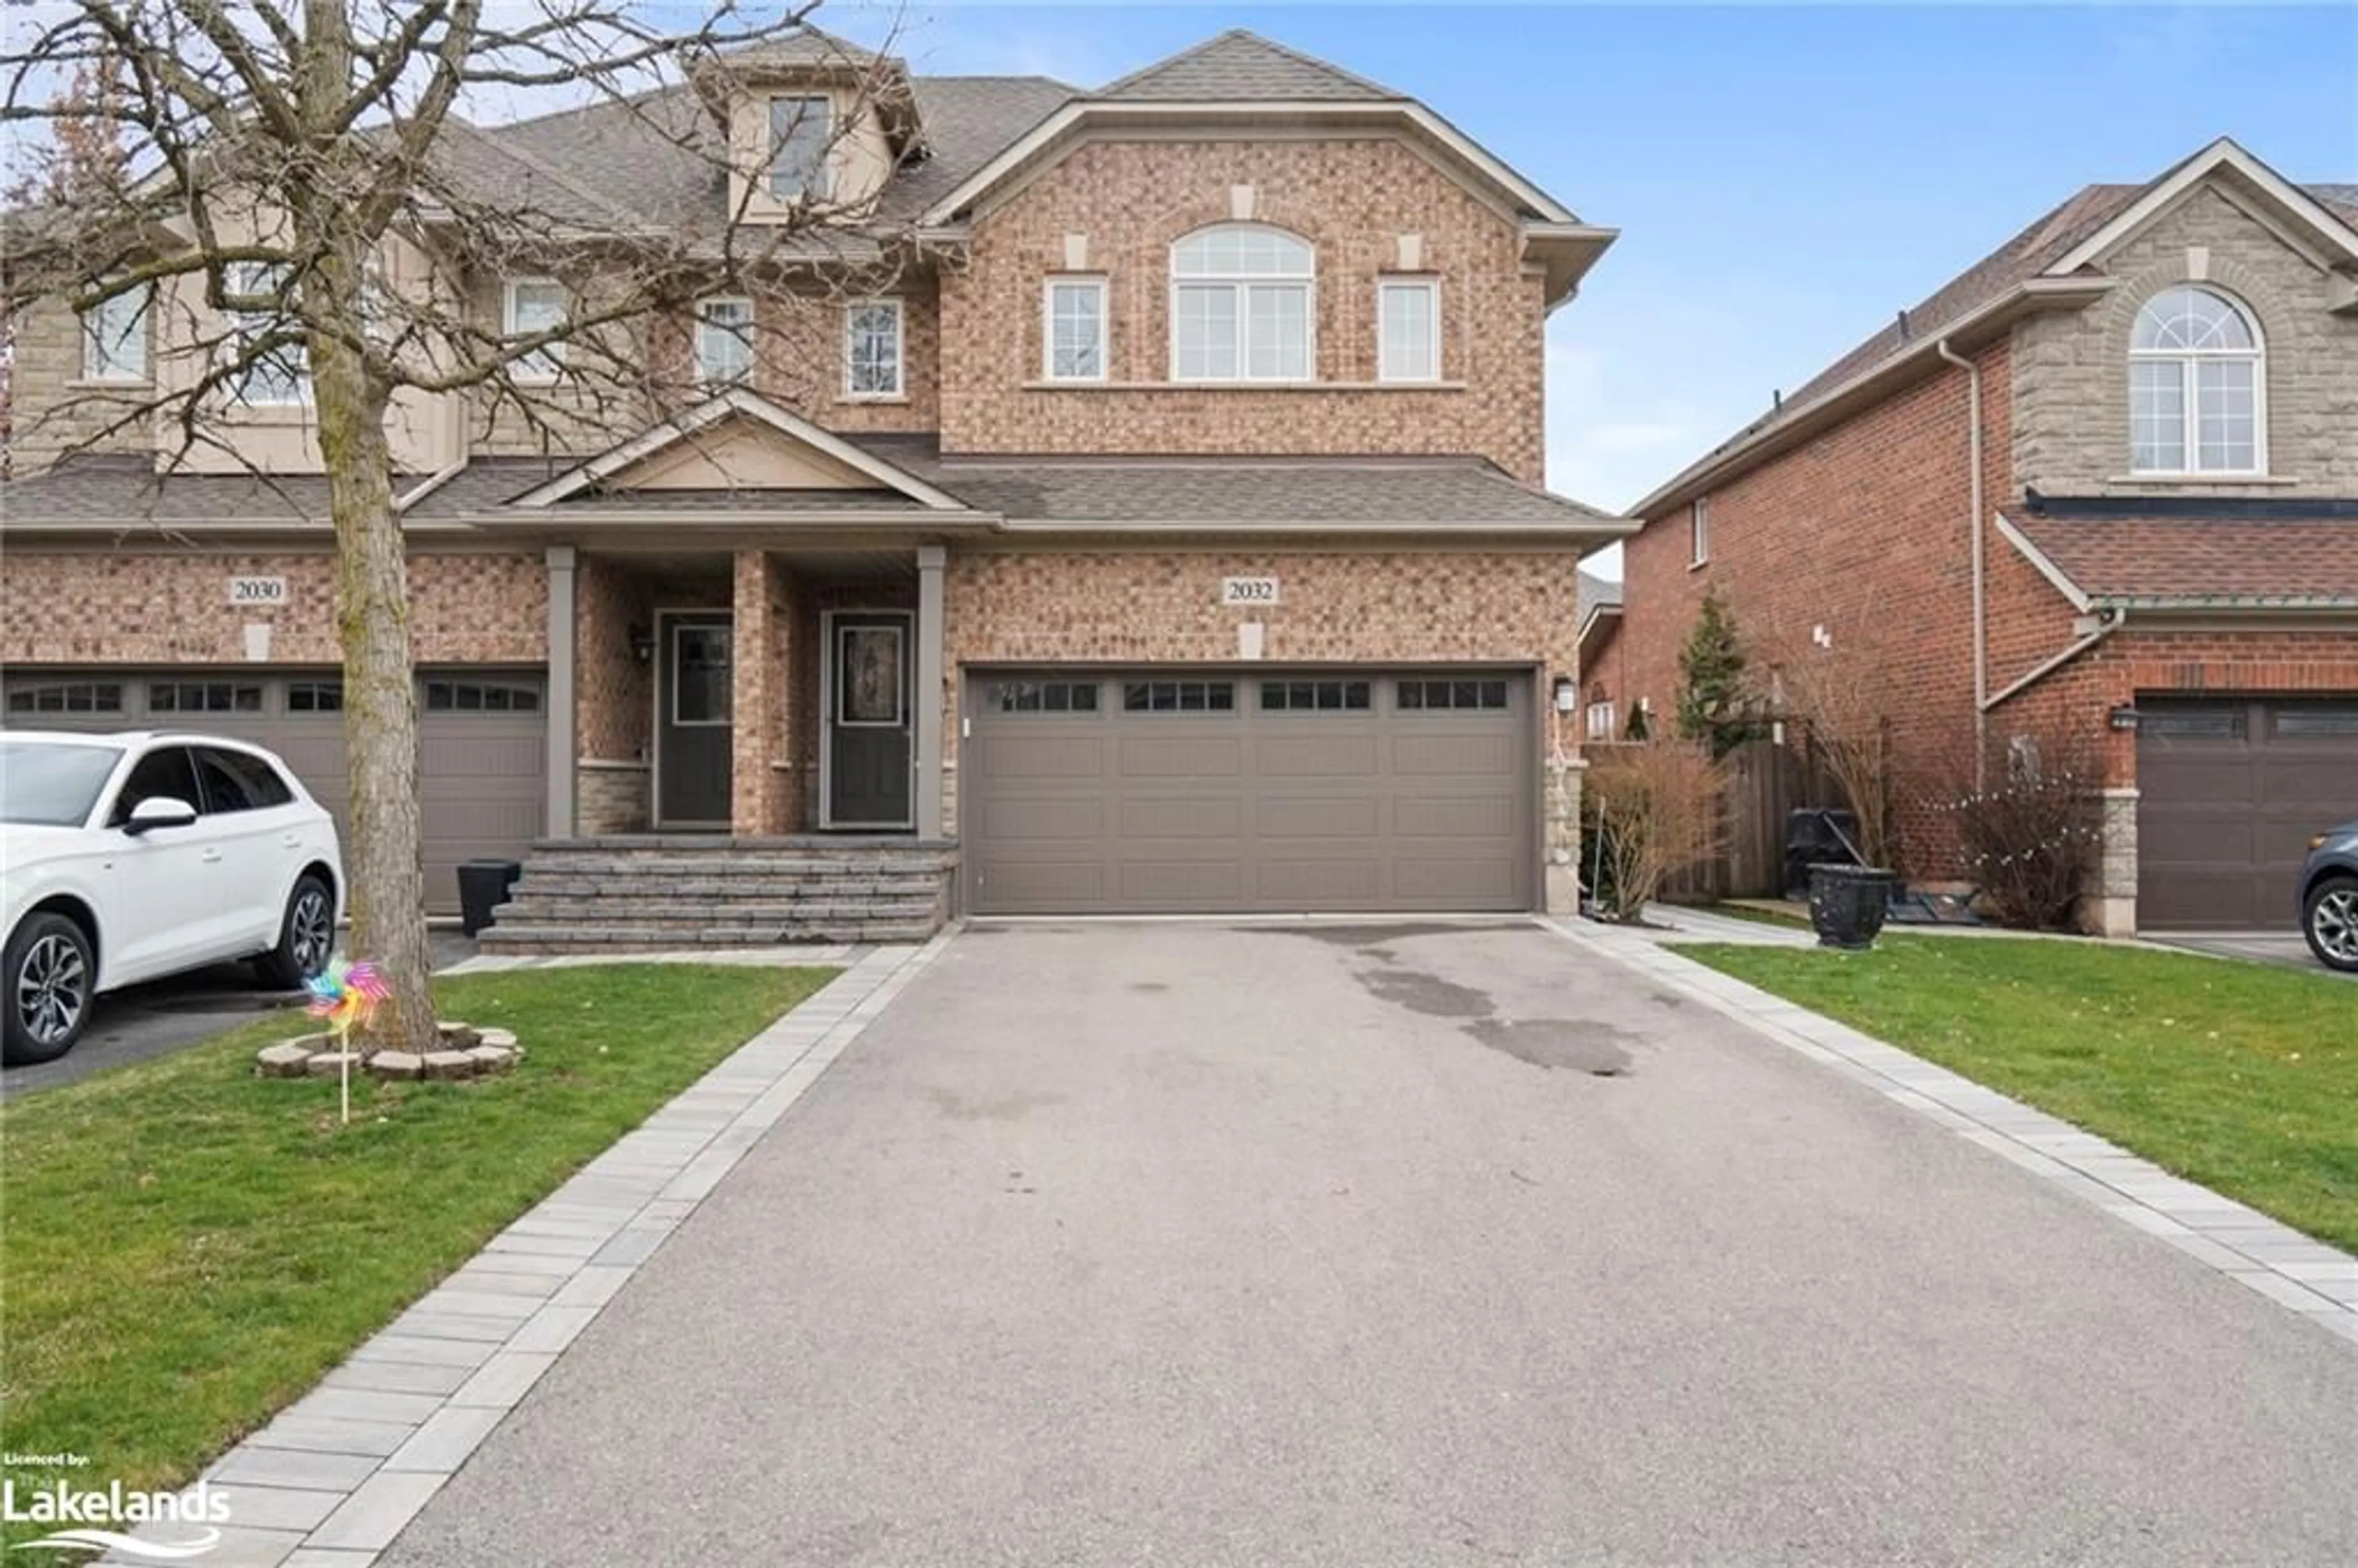 Home with brick exterior material for 2032 Erika Crt, Oakville Ontario L6M 4R4